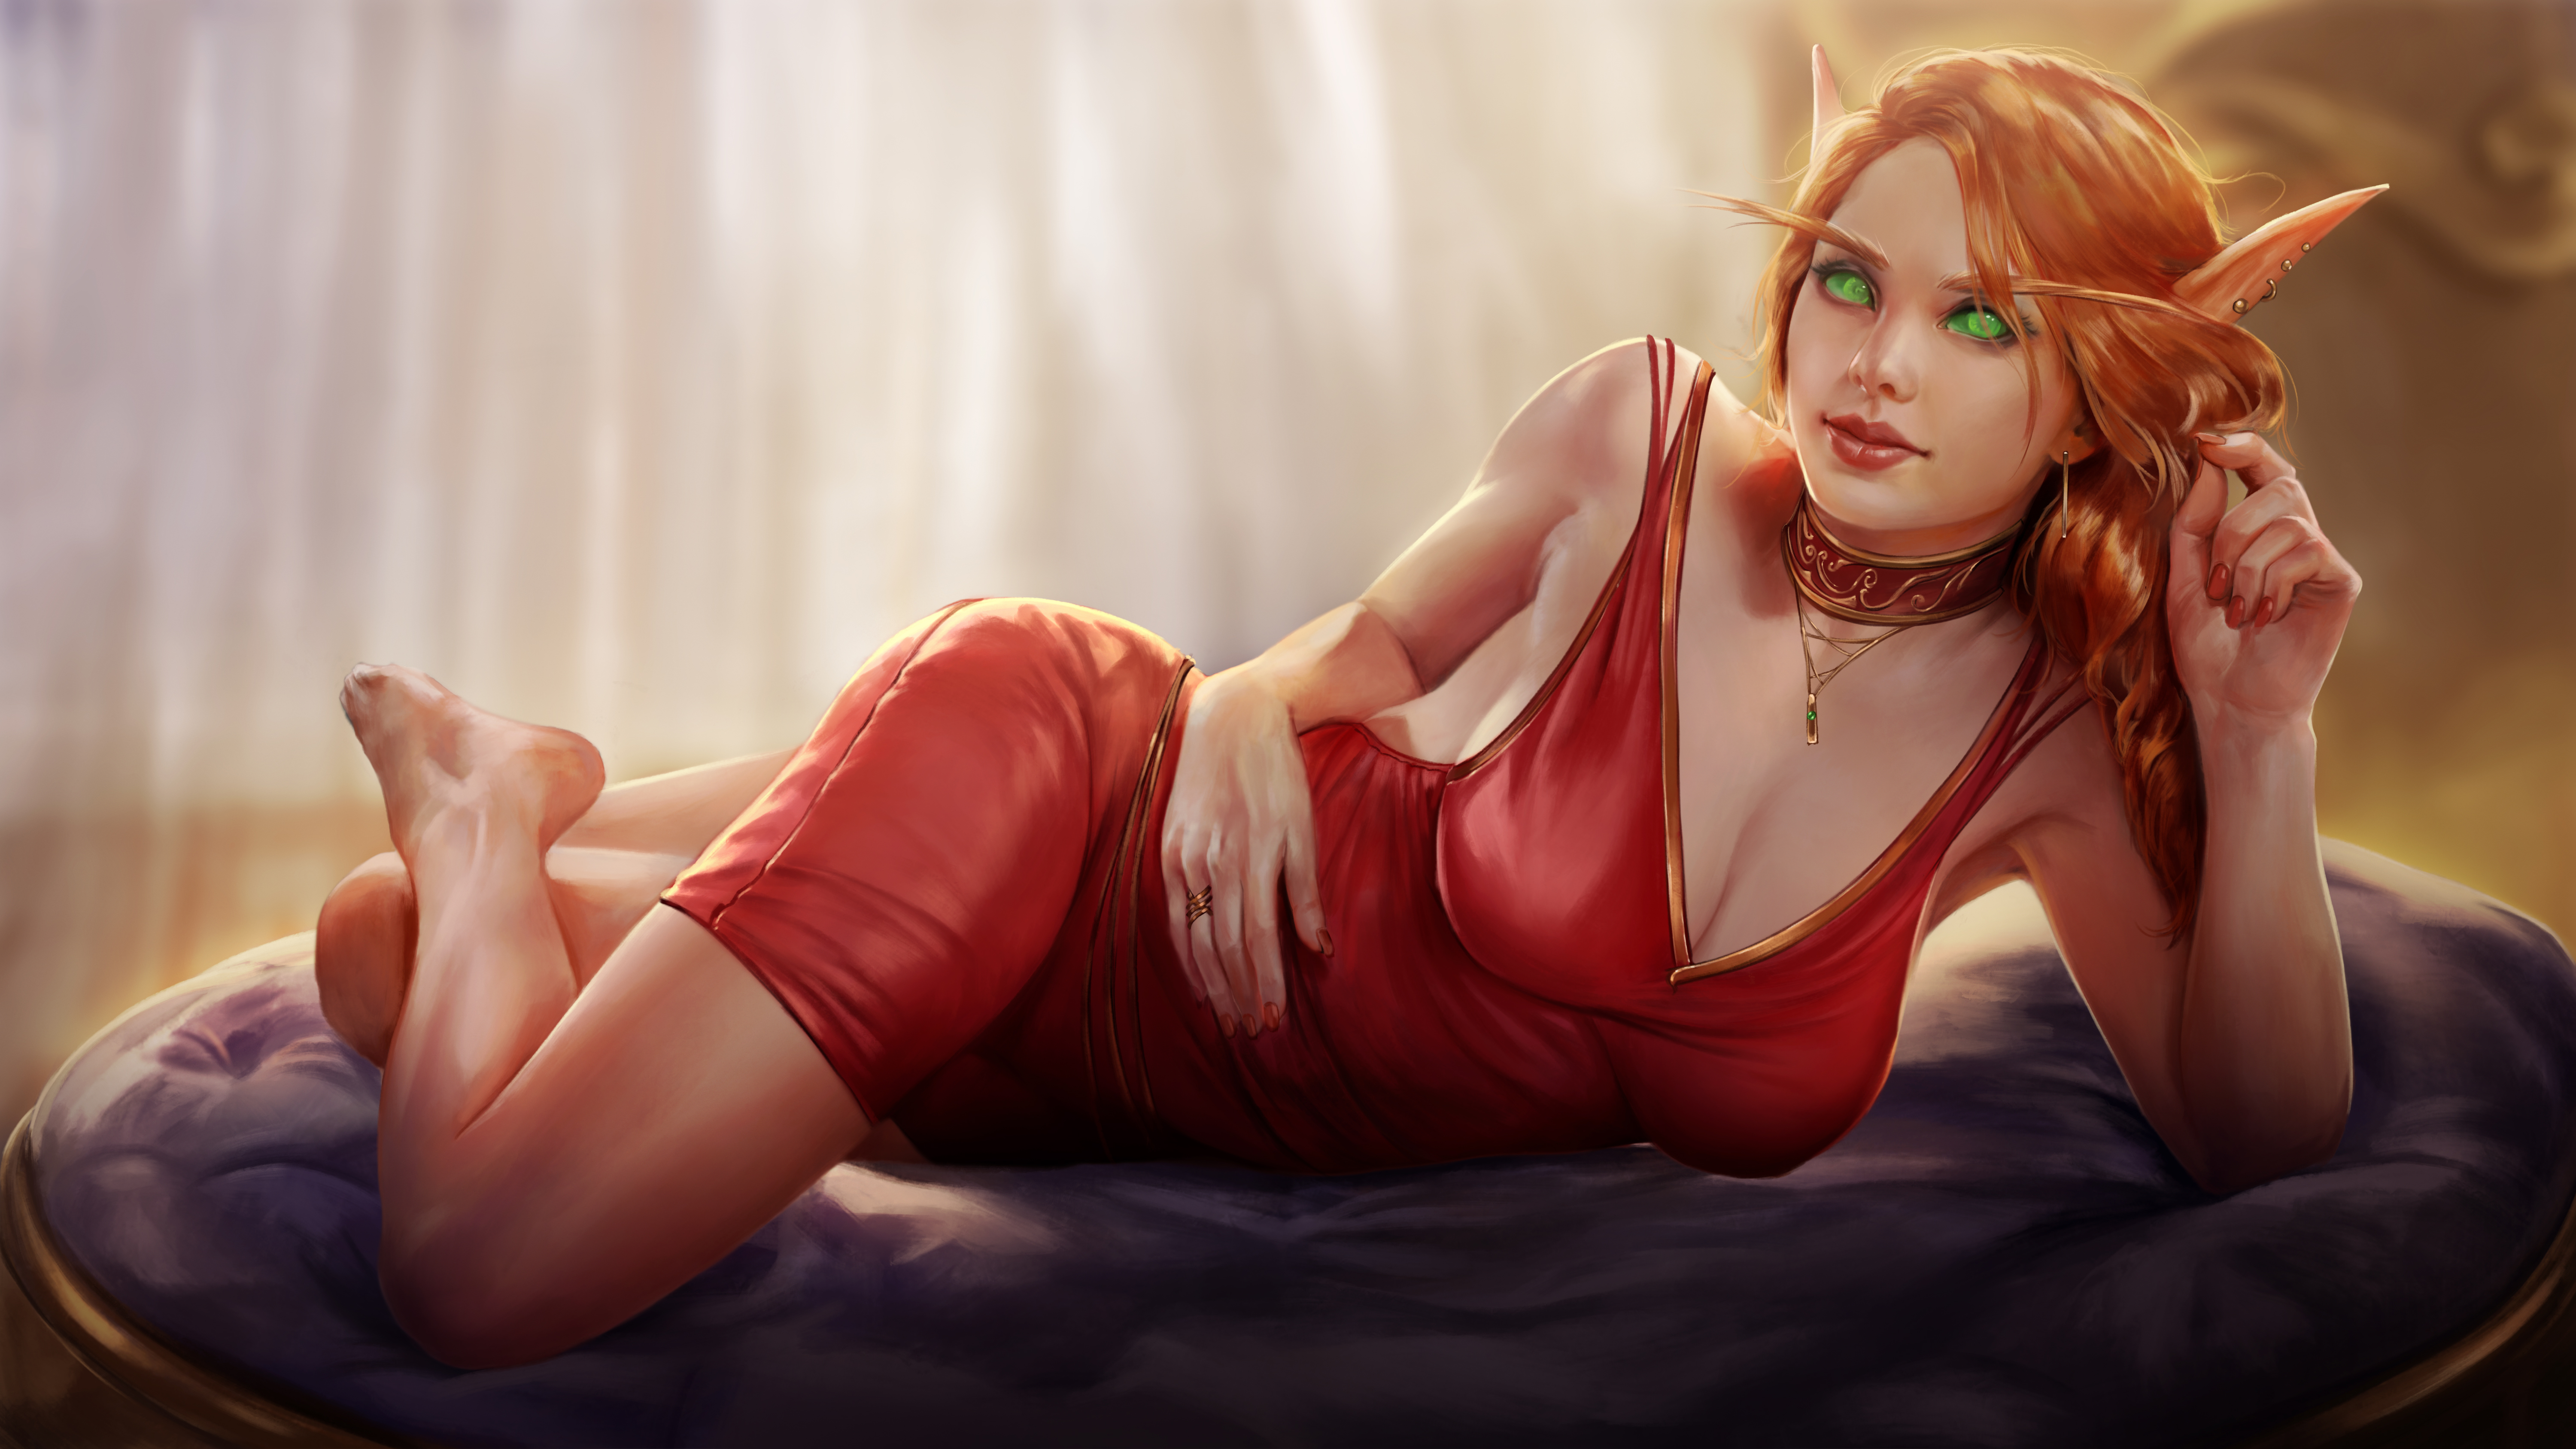 General 6000x3375 Firolian video game art video game girls artwork lying on side red dress cleavage pointy ears red clothing fan art video games barefoot legs digital painting digital art green eyes video game characters looking at viewer women World of Warcraft Lady Liadrin fictional fictional character